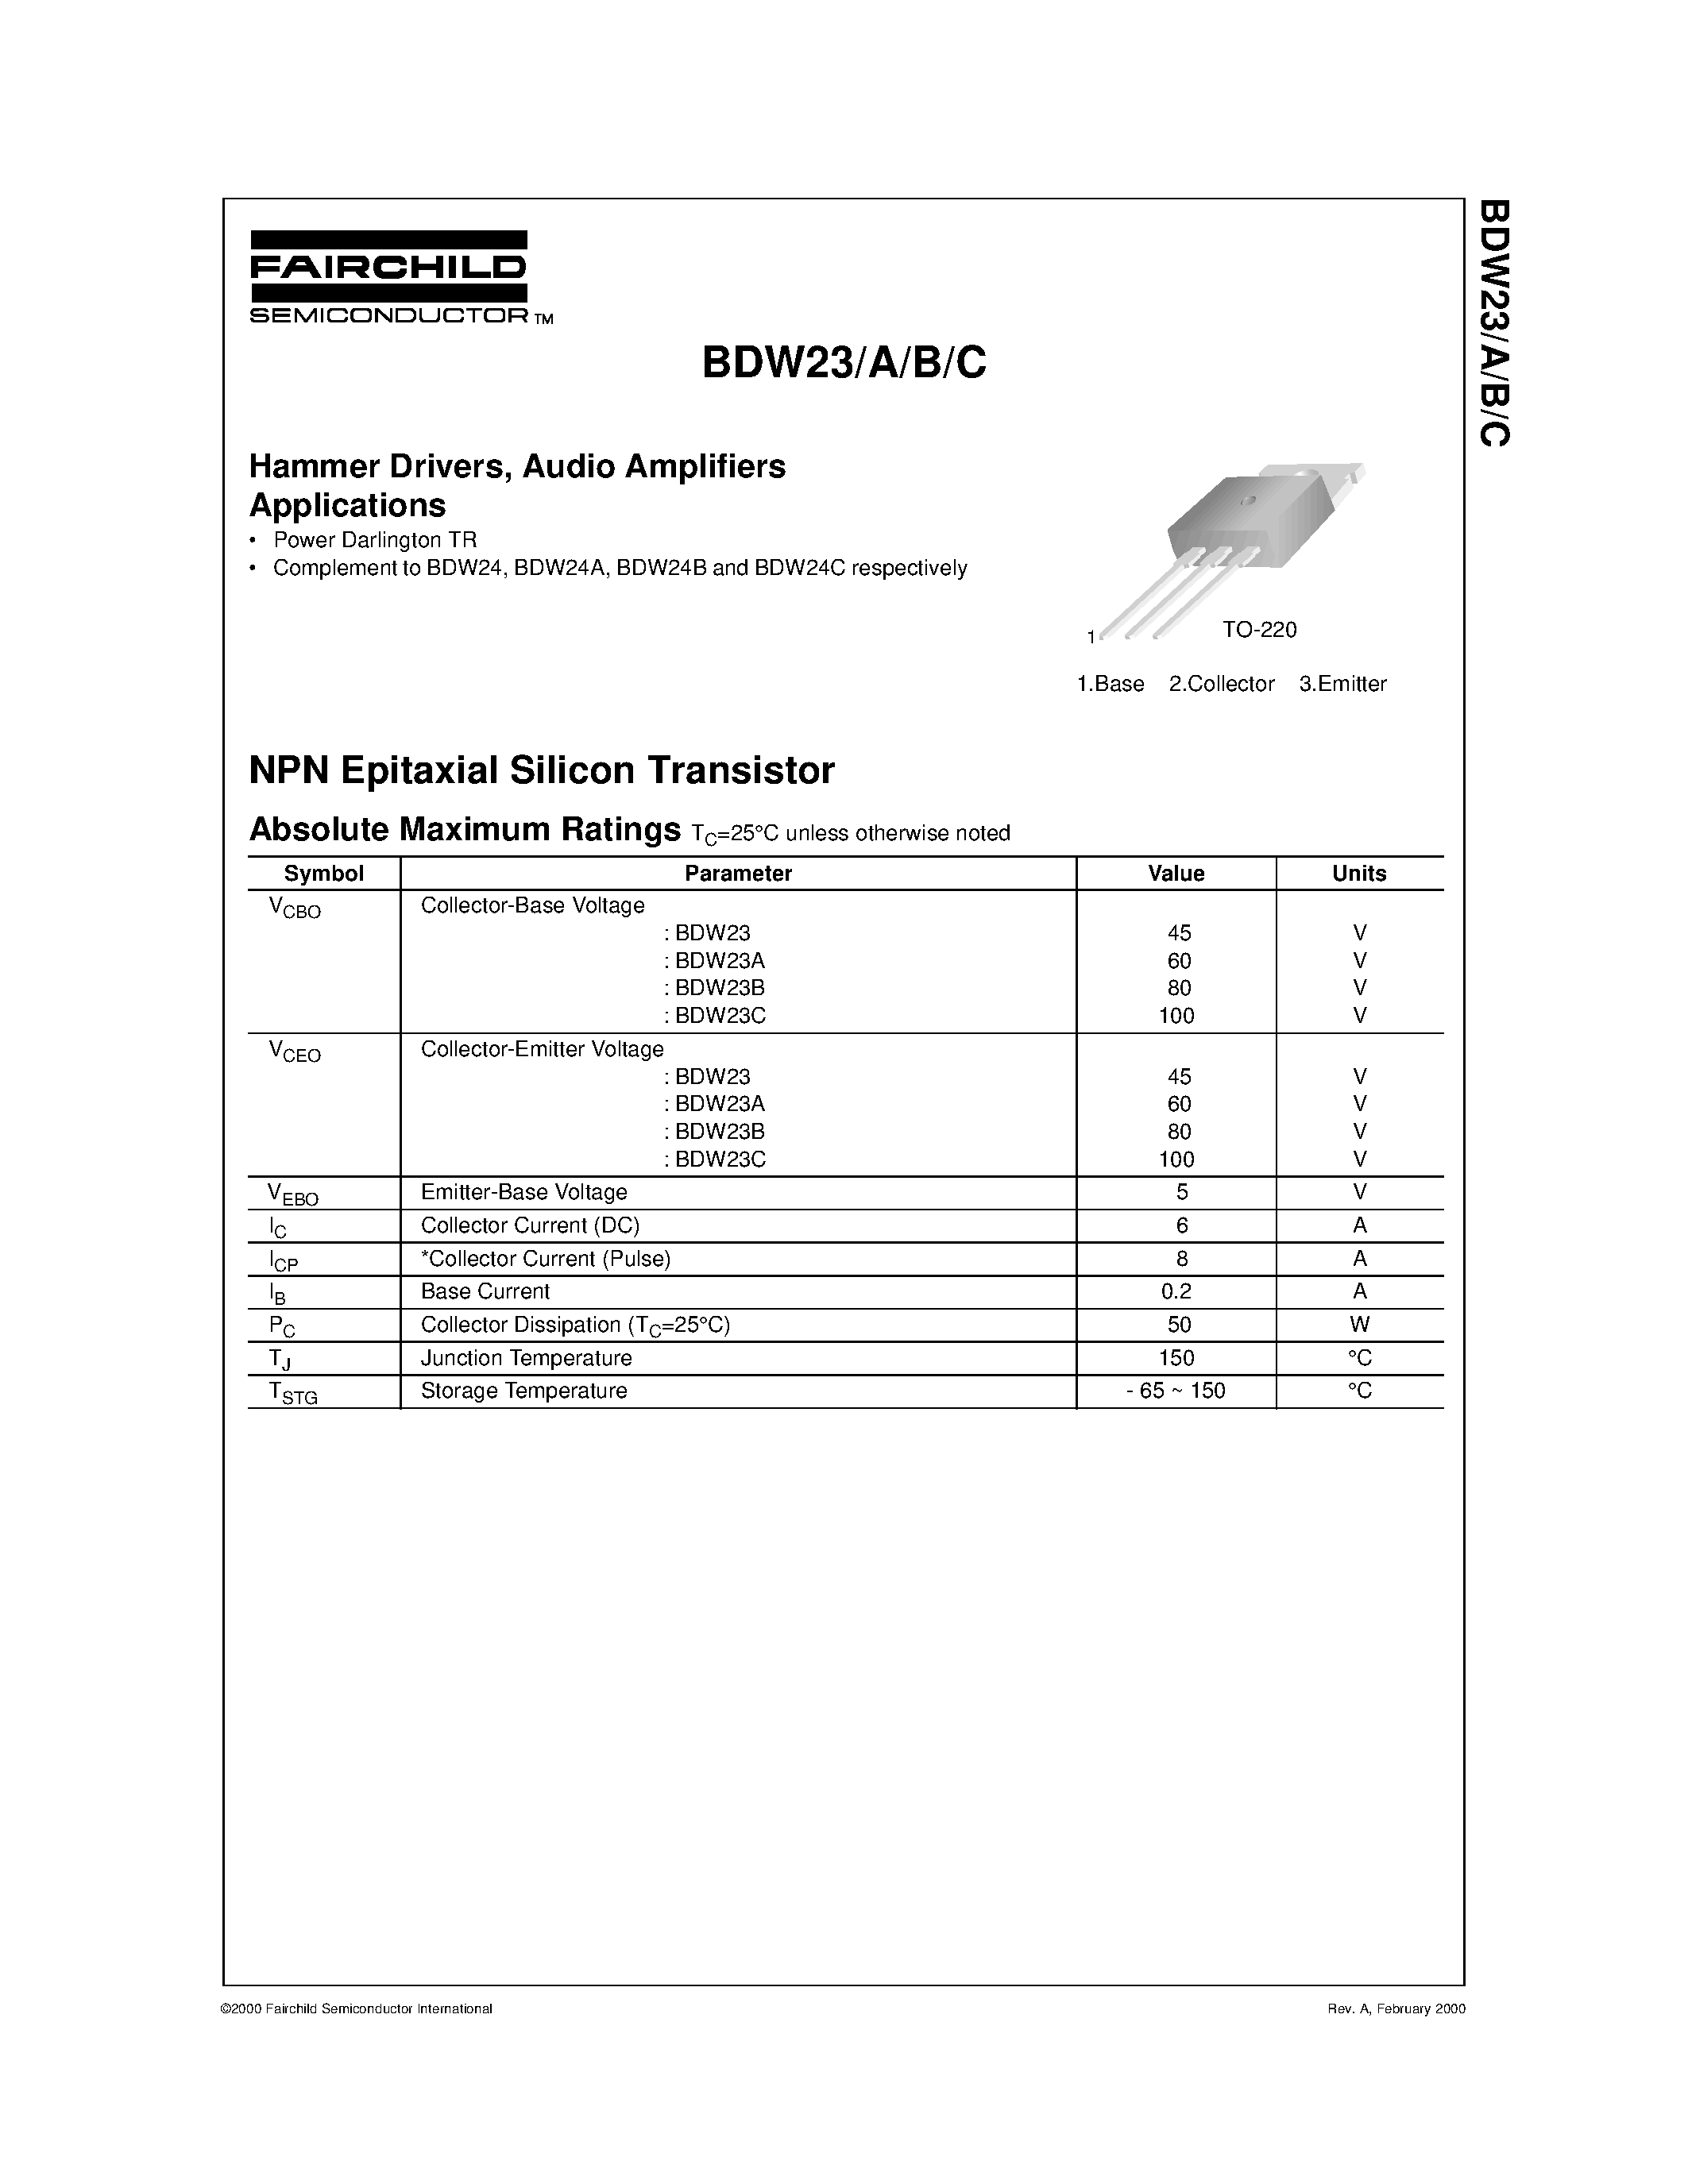 Datasheet BDW23A - Hammer Drivers/ Audio Amplifiers Applications page 1